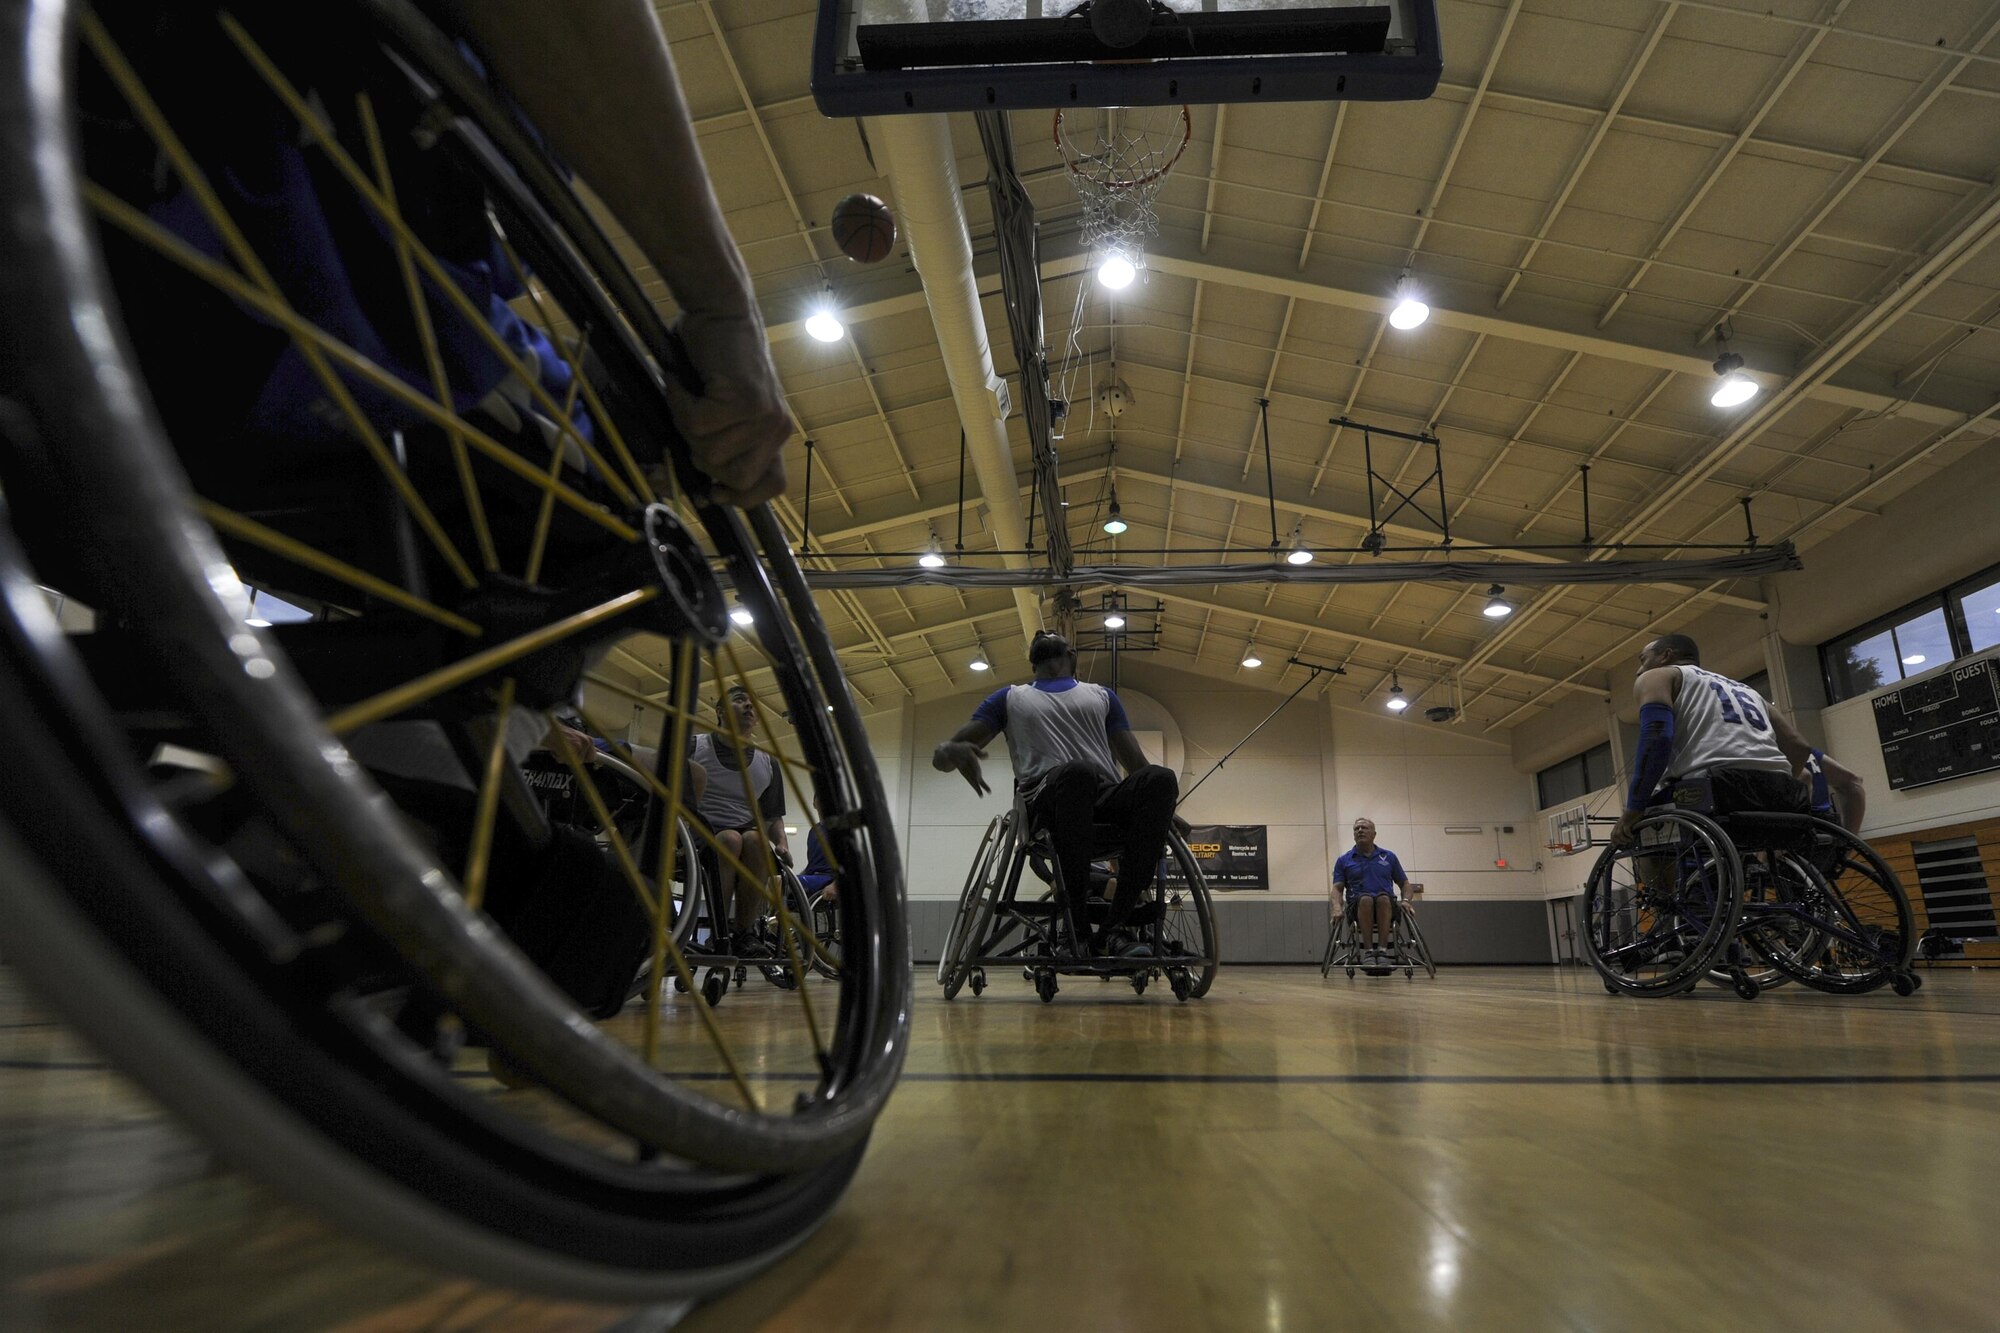 The Air Force wheelchair basketball team scrimmages during practice at Hurlburt Field, Fla., April 24, 2017. The team is composed of wounded warriors who compete against other Department of Defense teams. (U.S. Air Force photo by Airman 1st Class Dennis Spain)